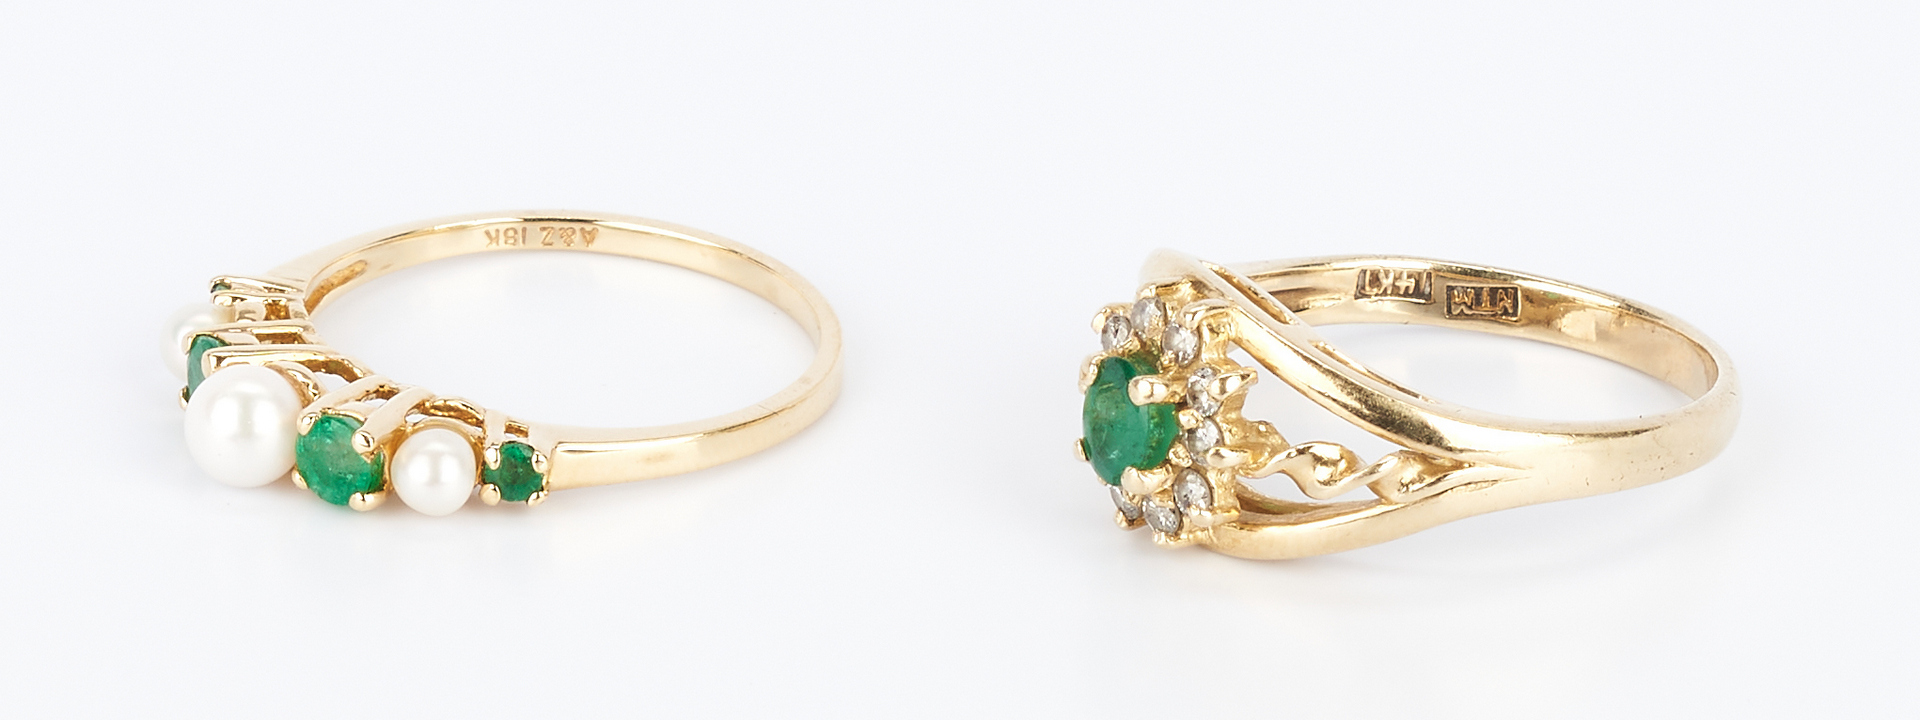 Lot 918: Gold & Emerald Bracelet and Rings